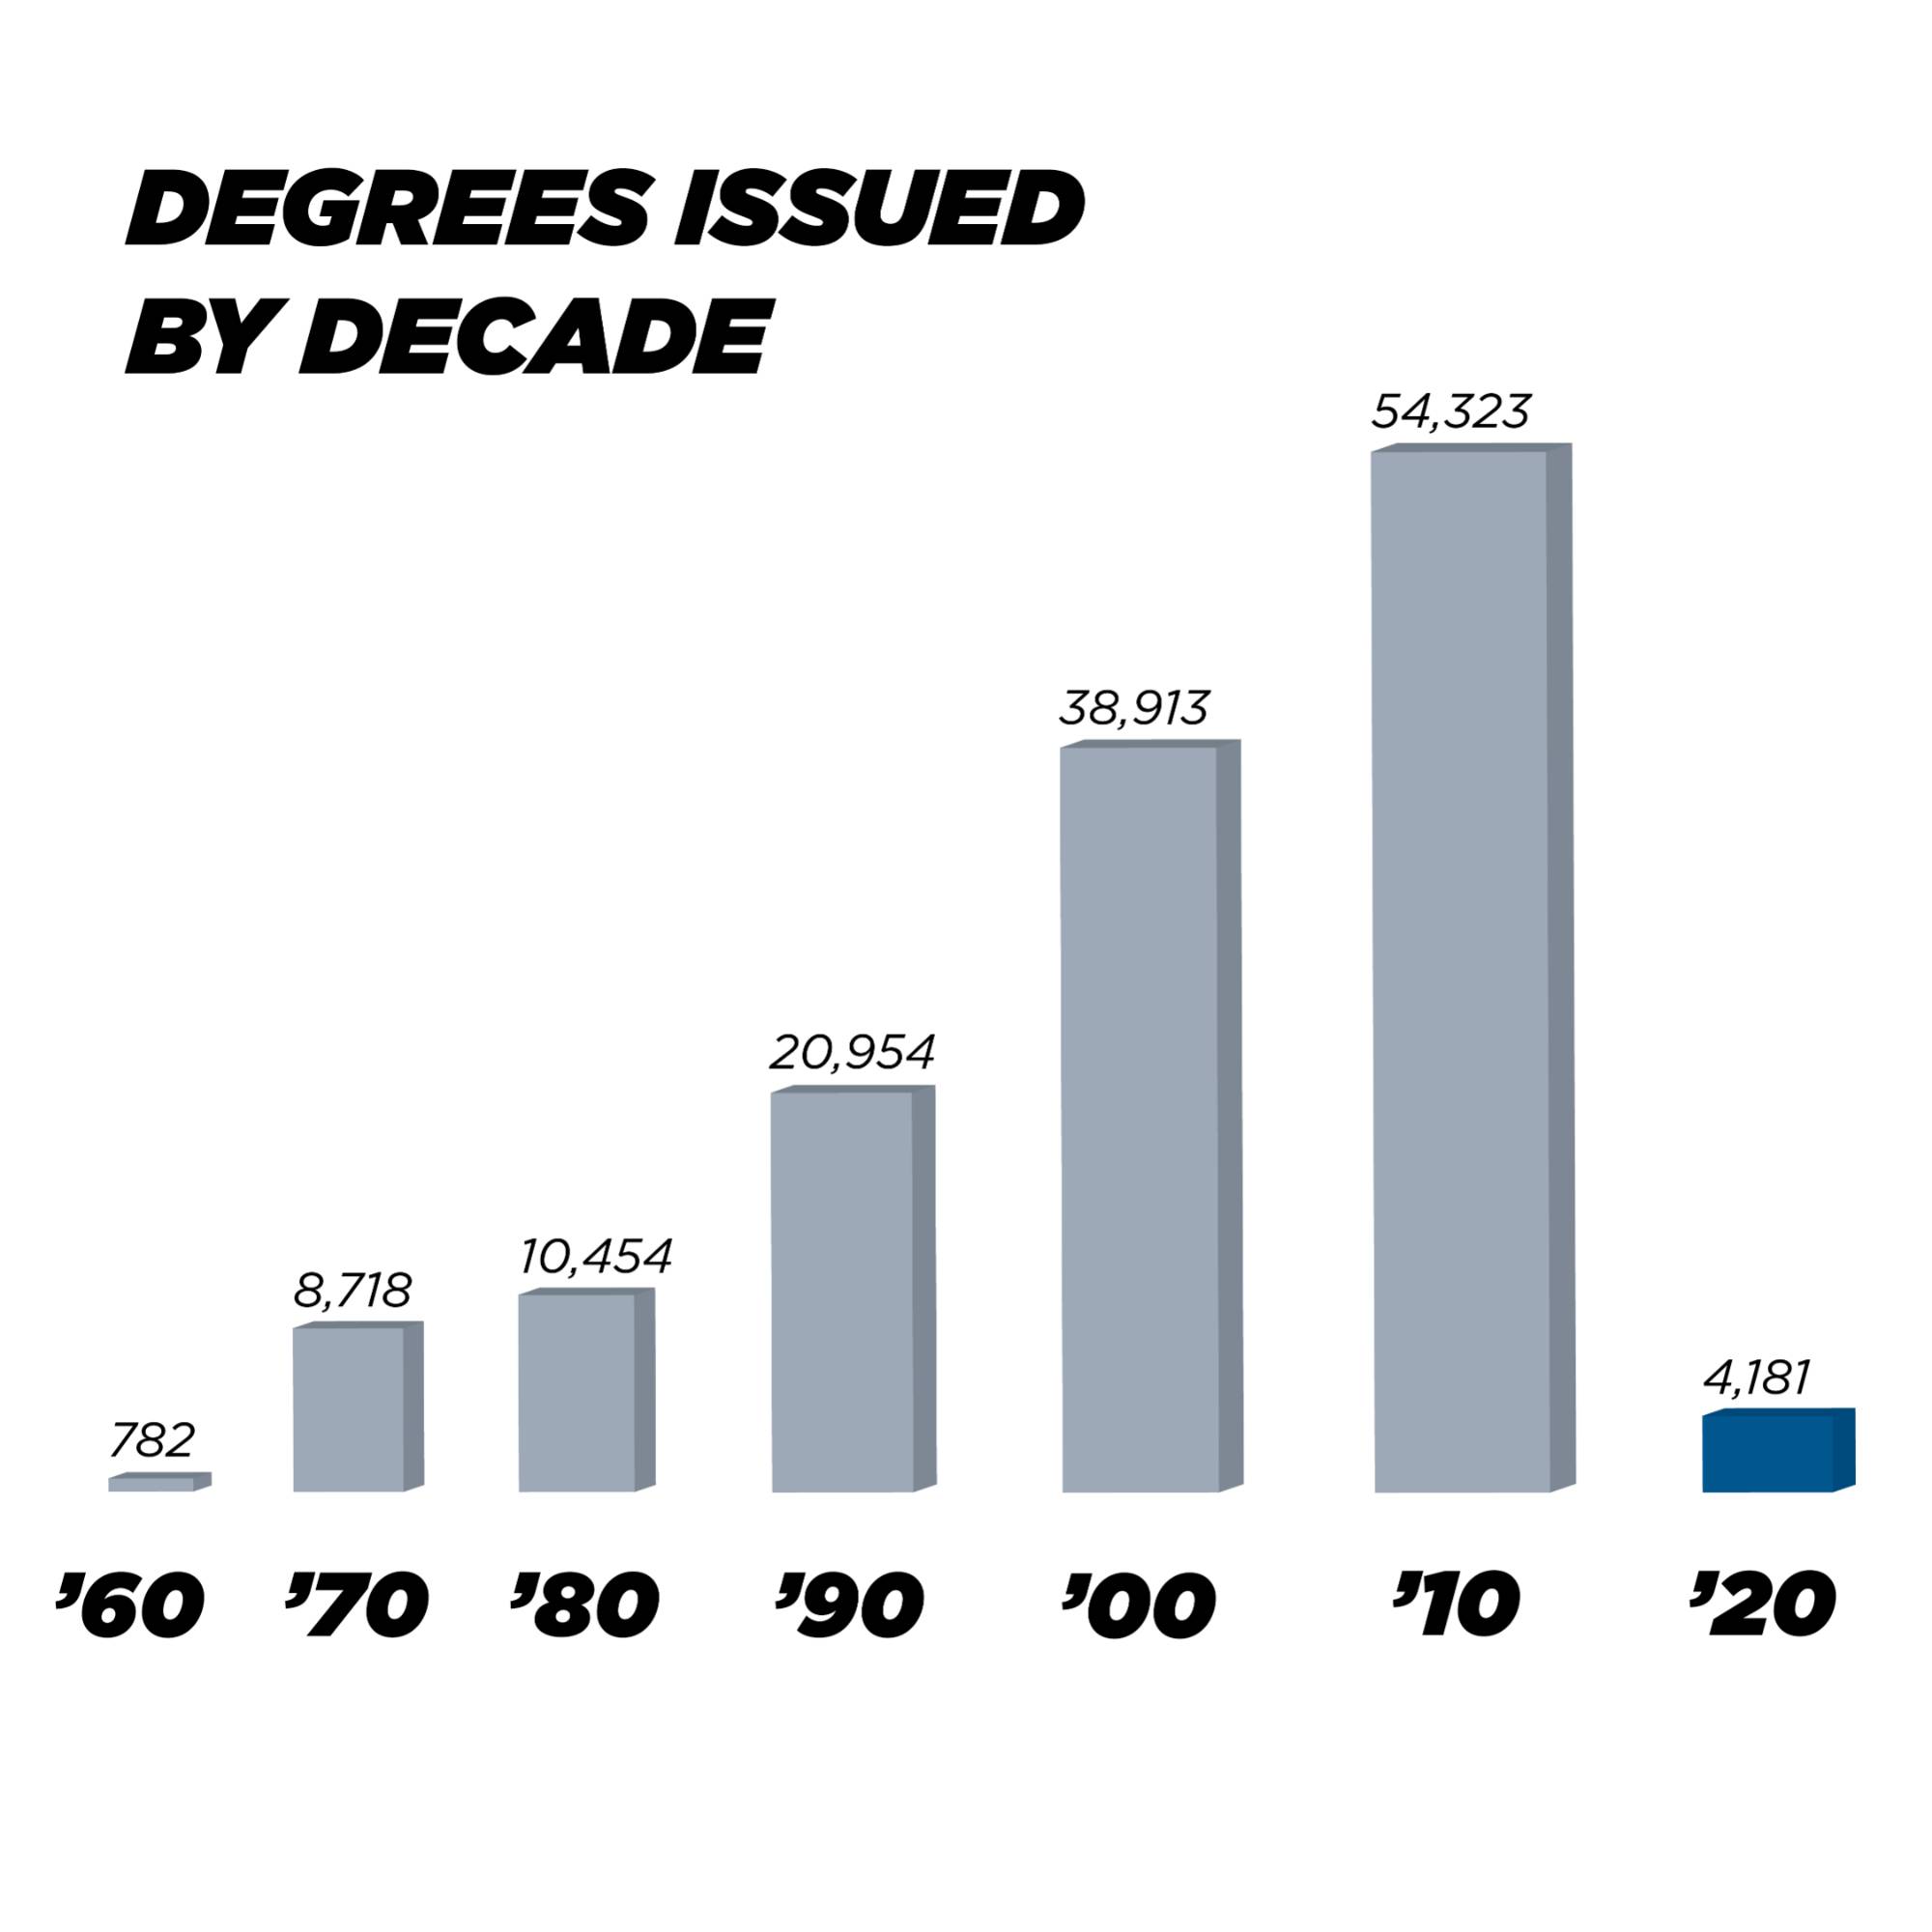 DEGREES ISSUED  BY DECADE: 1960's - 782 DEGREES , 1970's - 8,718 DEGREES, 1980's - 10,454 DEGREES, 1990's - 20,954 DEGREES, 2000's - 38,913 DEGREES, 2010's - 54,323 DEGREES, 2020's - 4,181 DEGREES